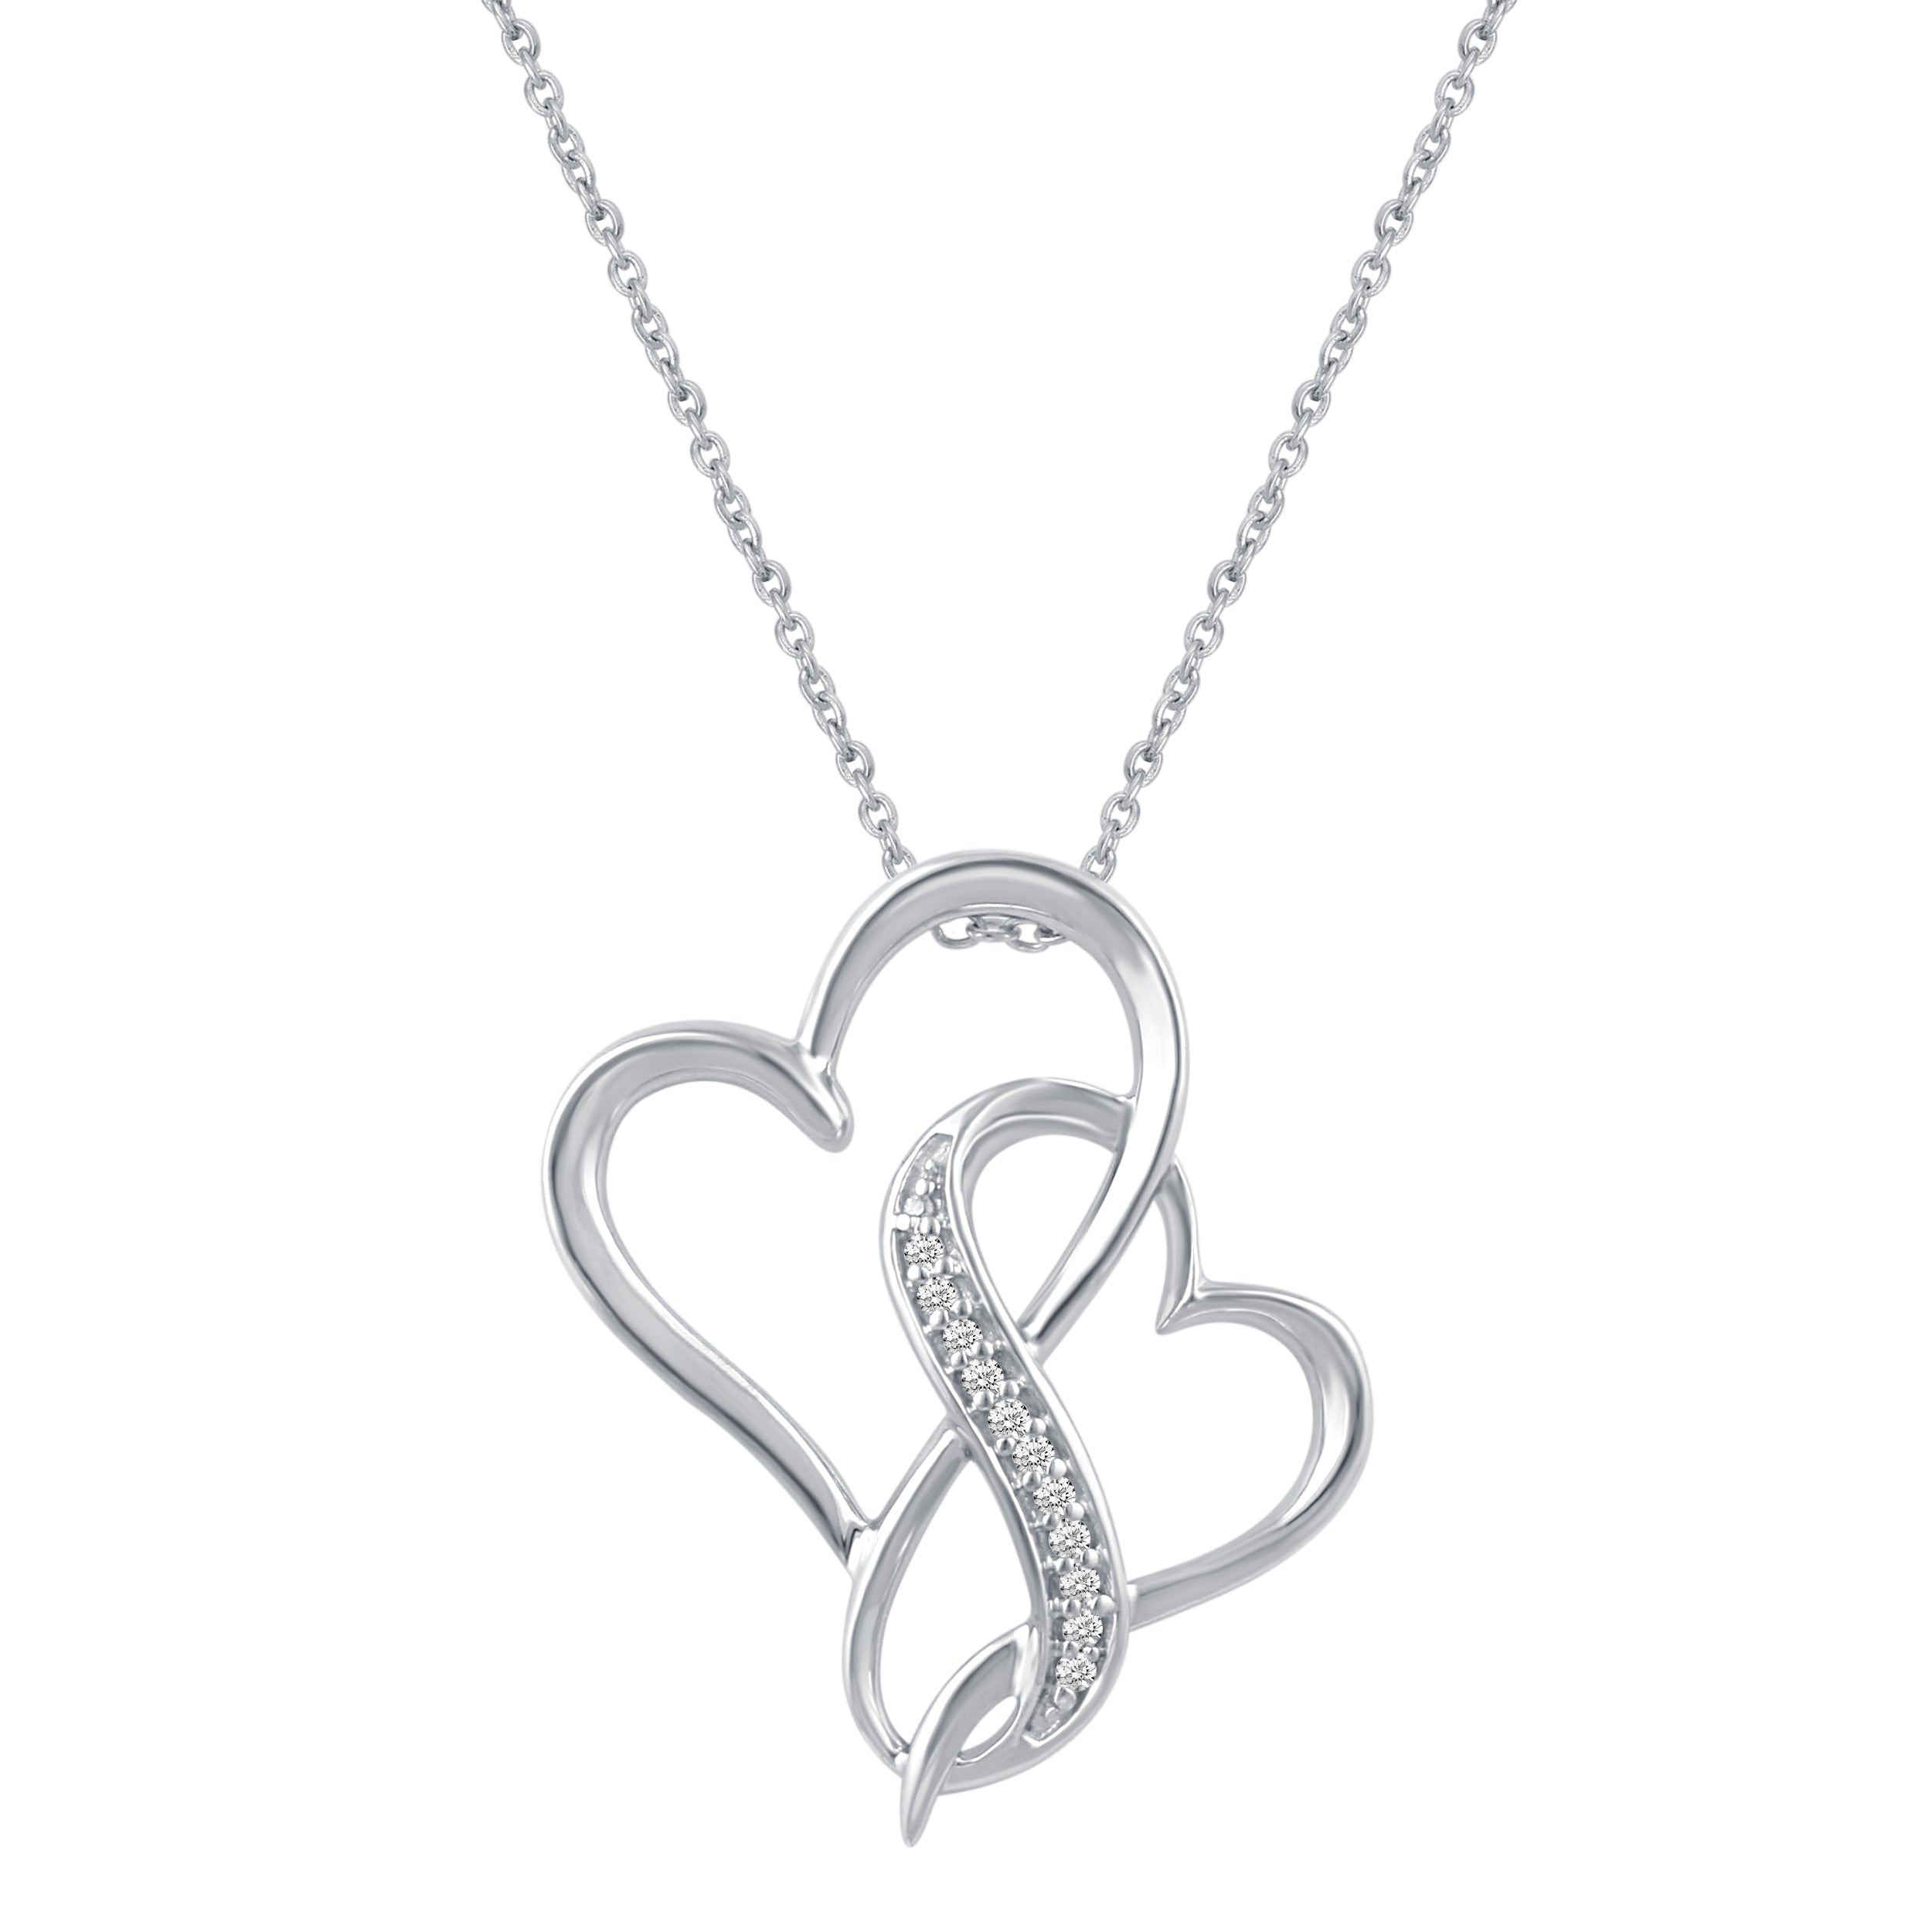 Entwined Heart Necklace By Bish Bosh Becca | notonthehighstreet.com